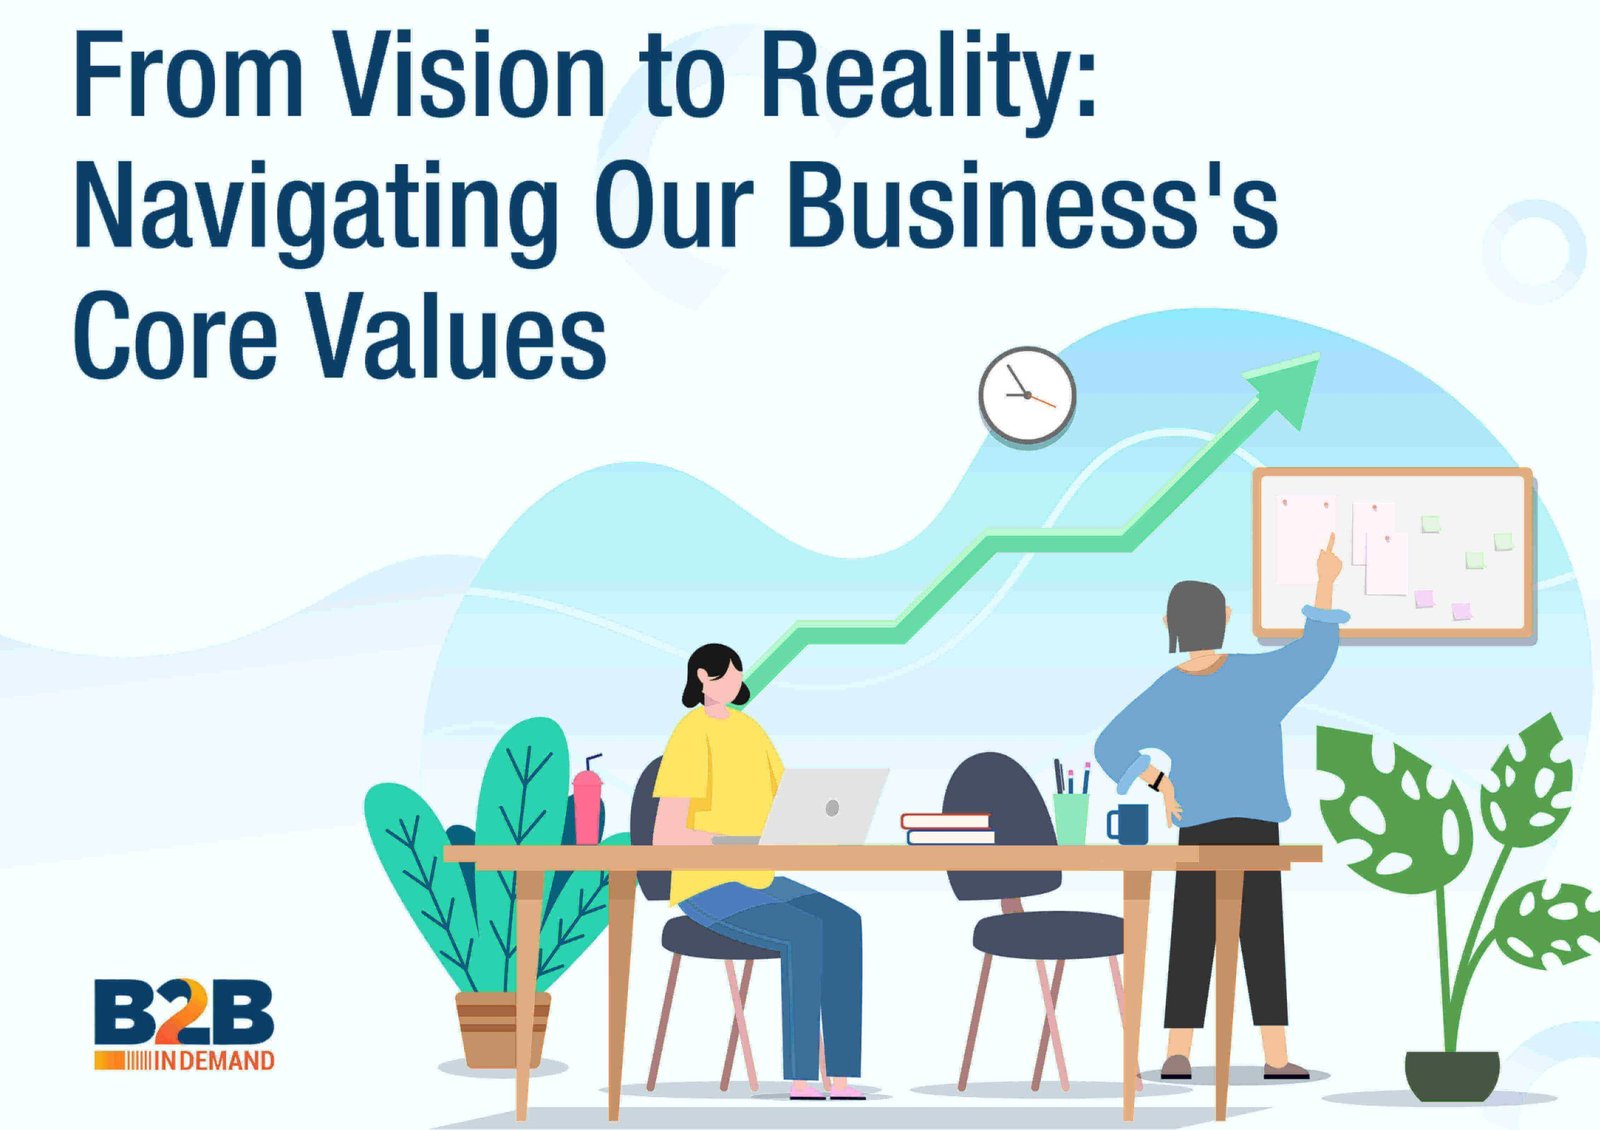 From Vision to Reality: Navigating Our Business’s Core Values